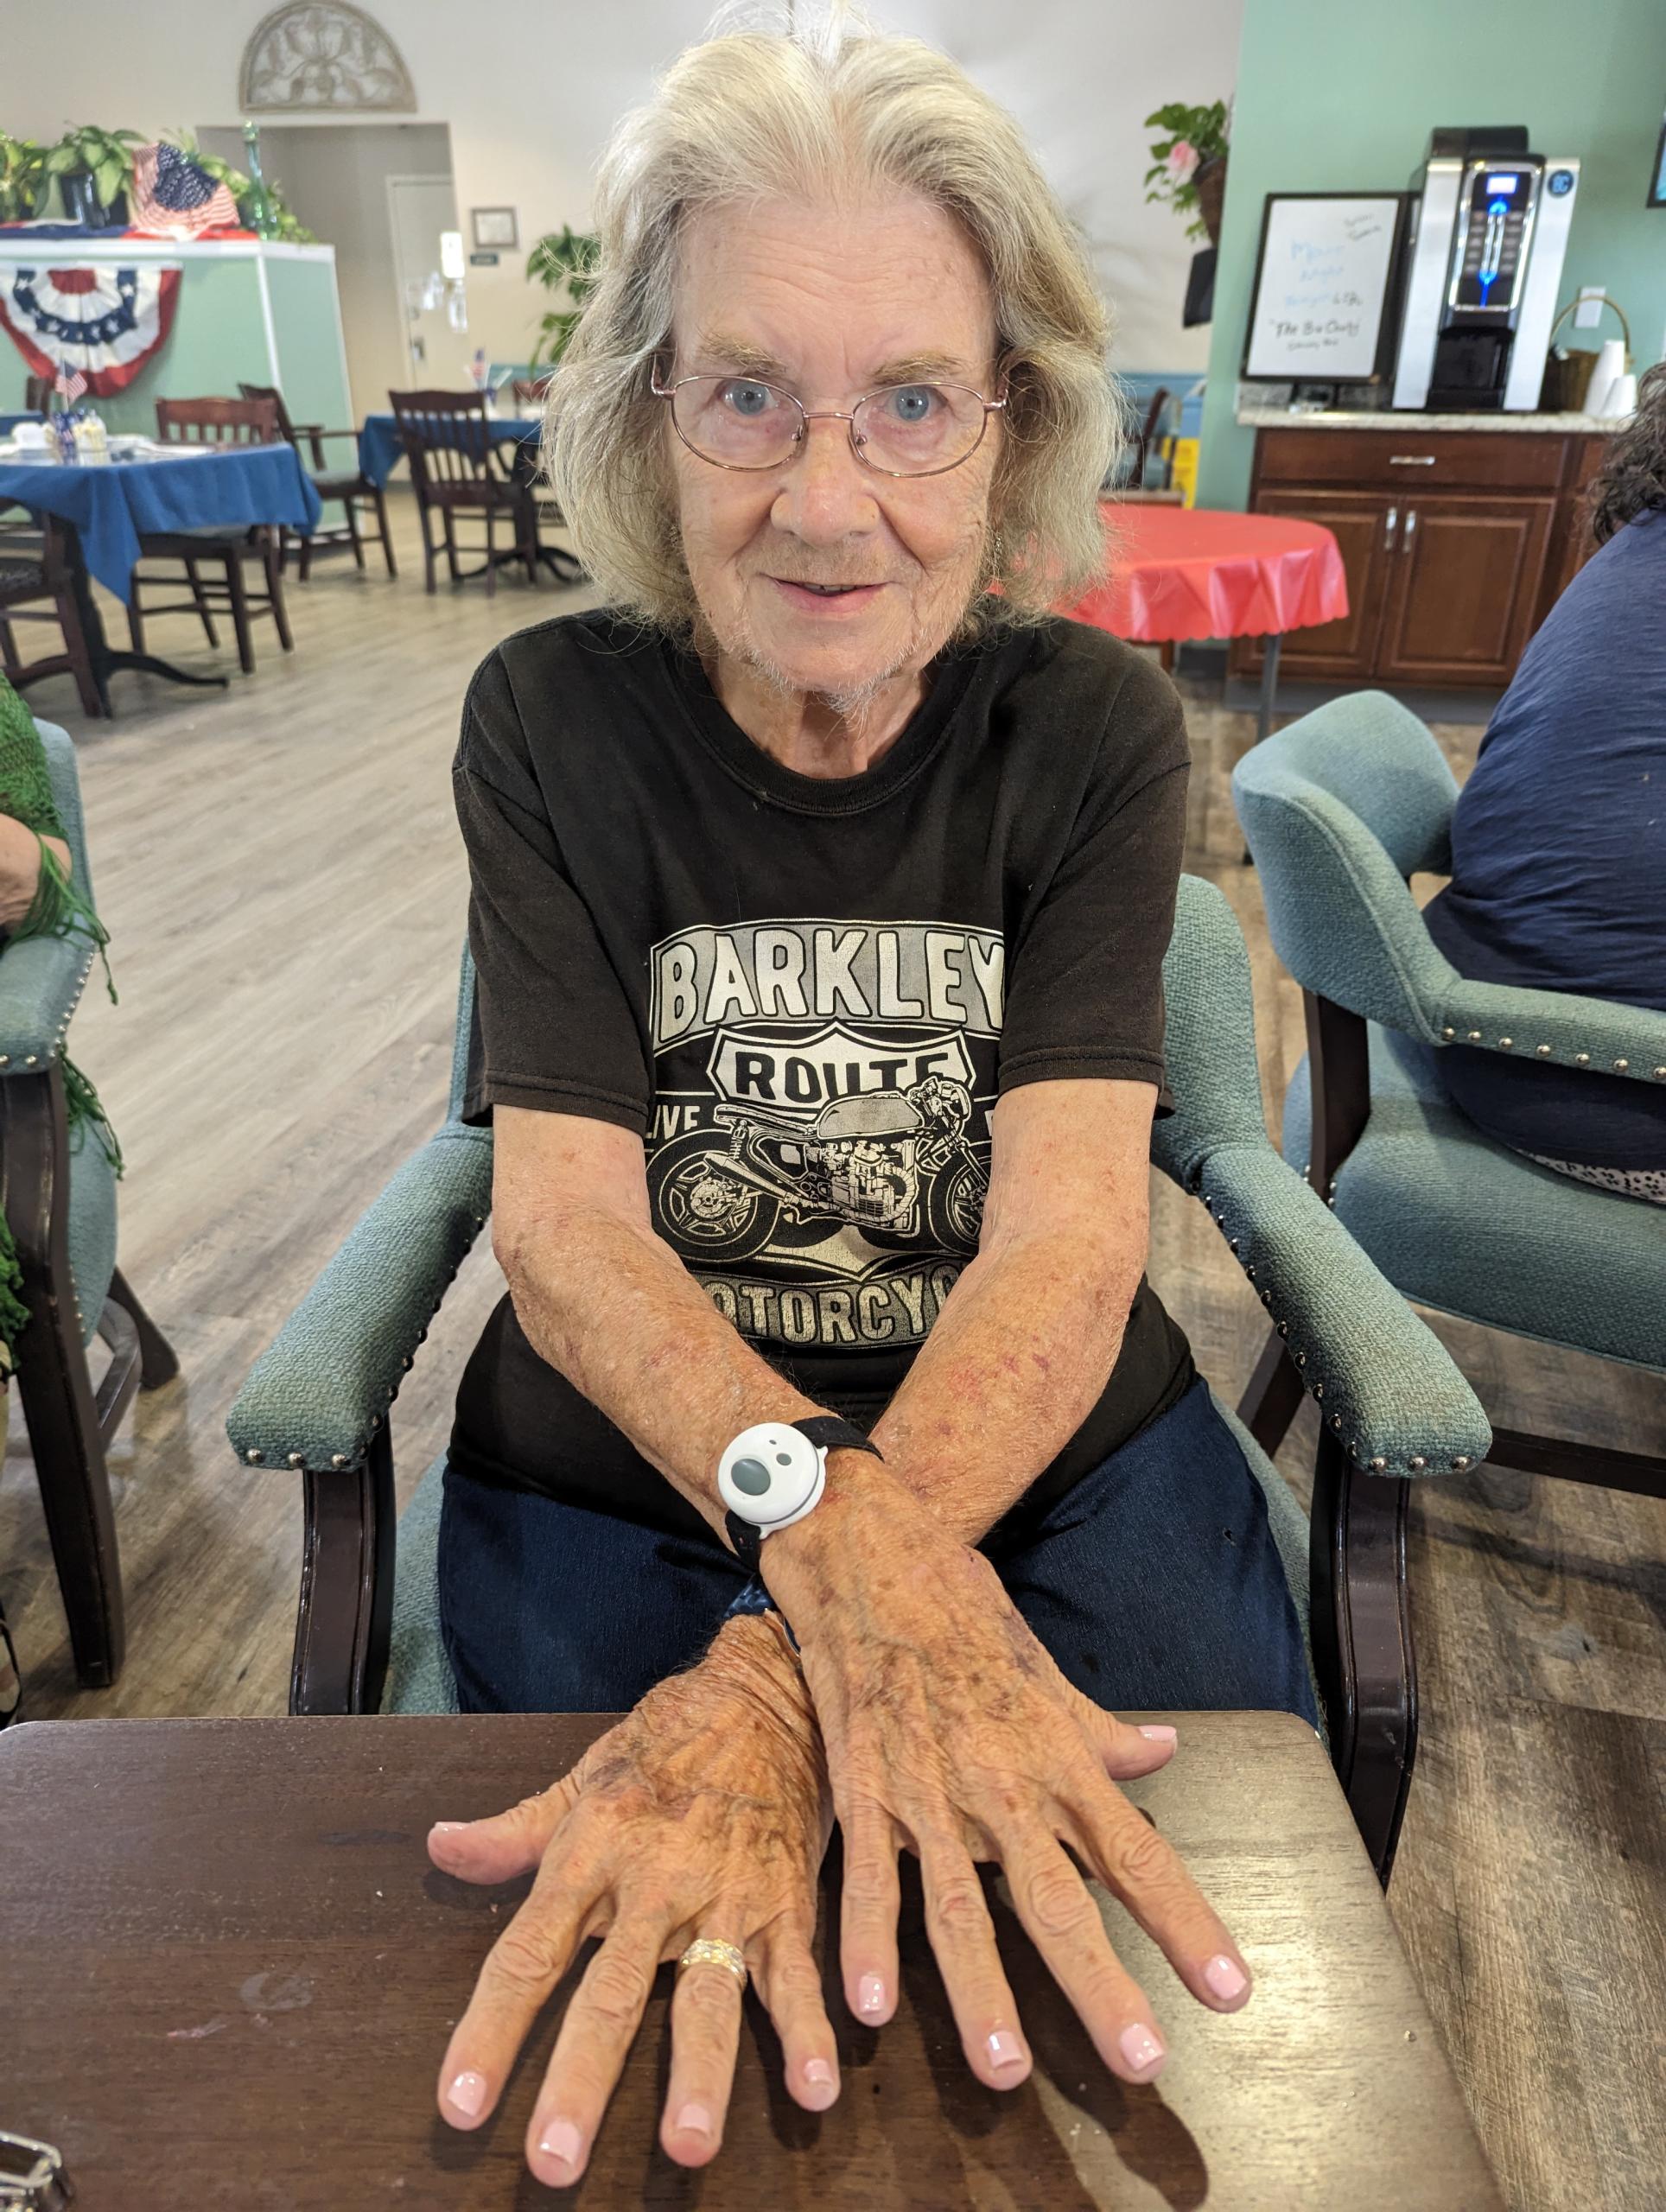 assisted living resident manicure showing her hands off